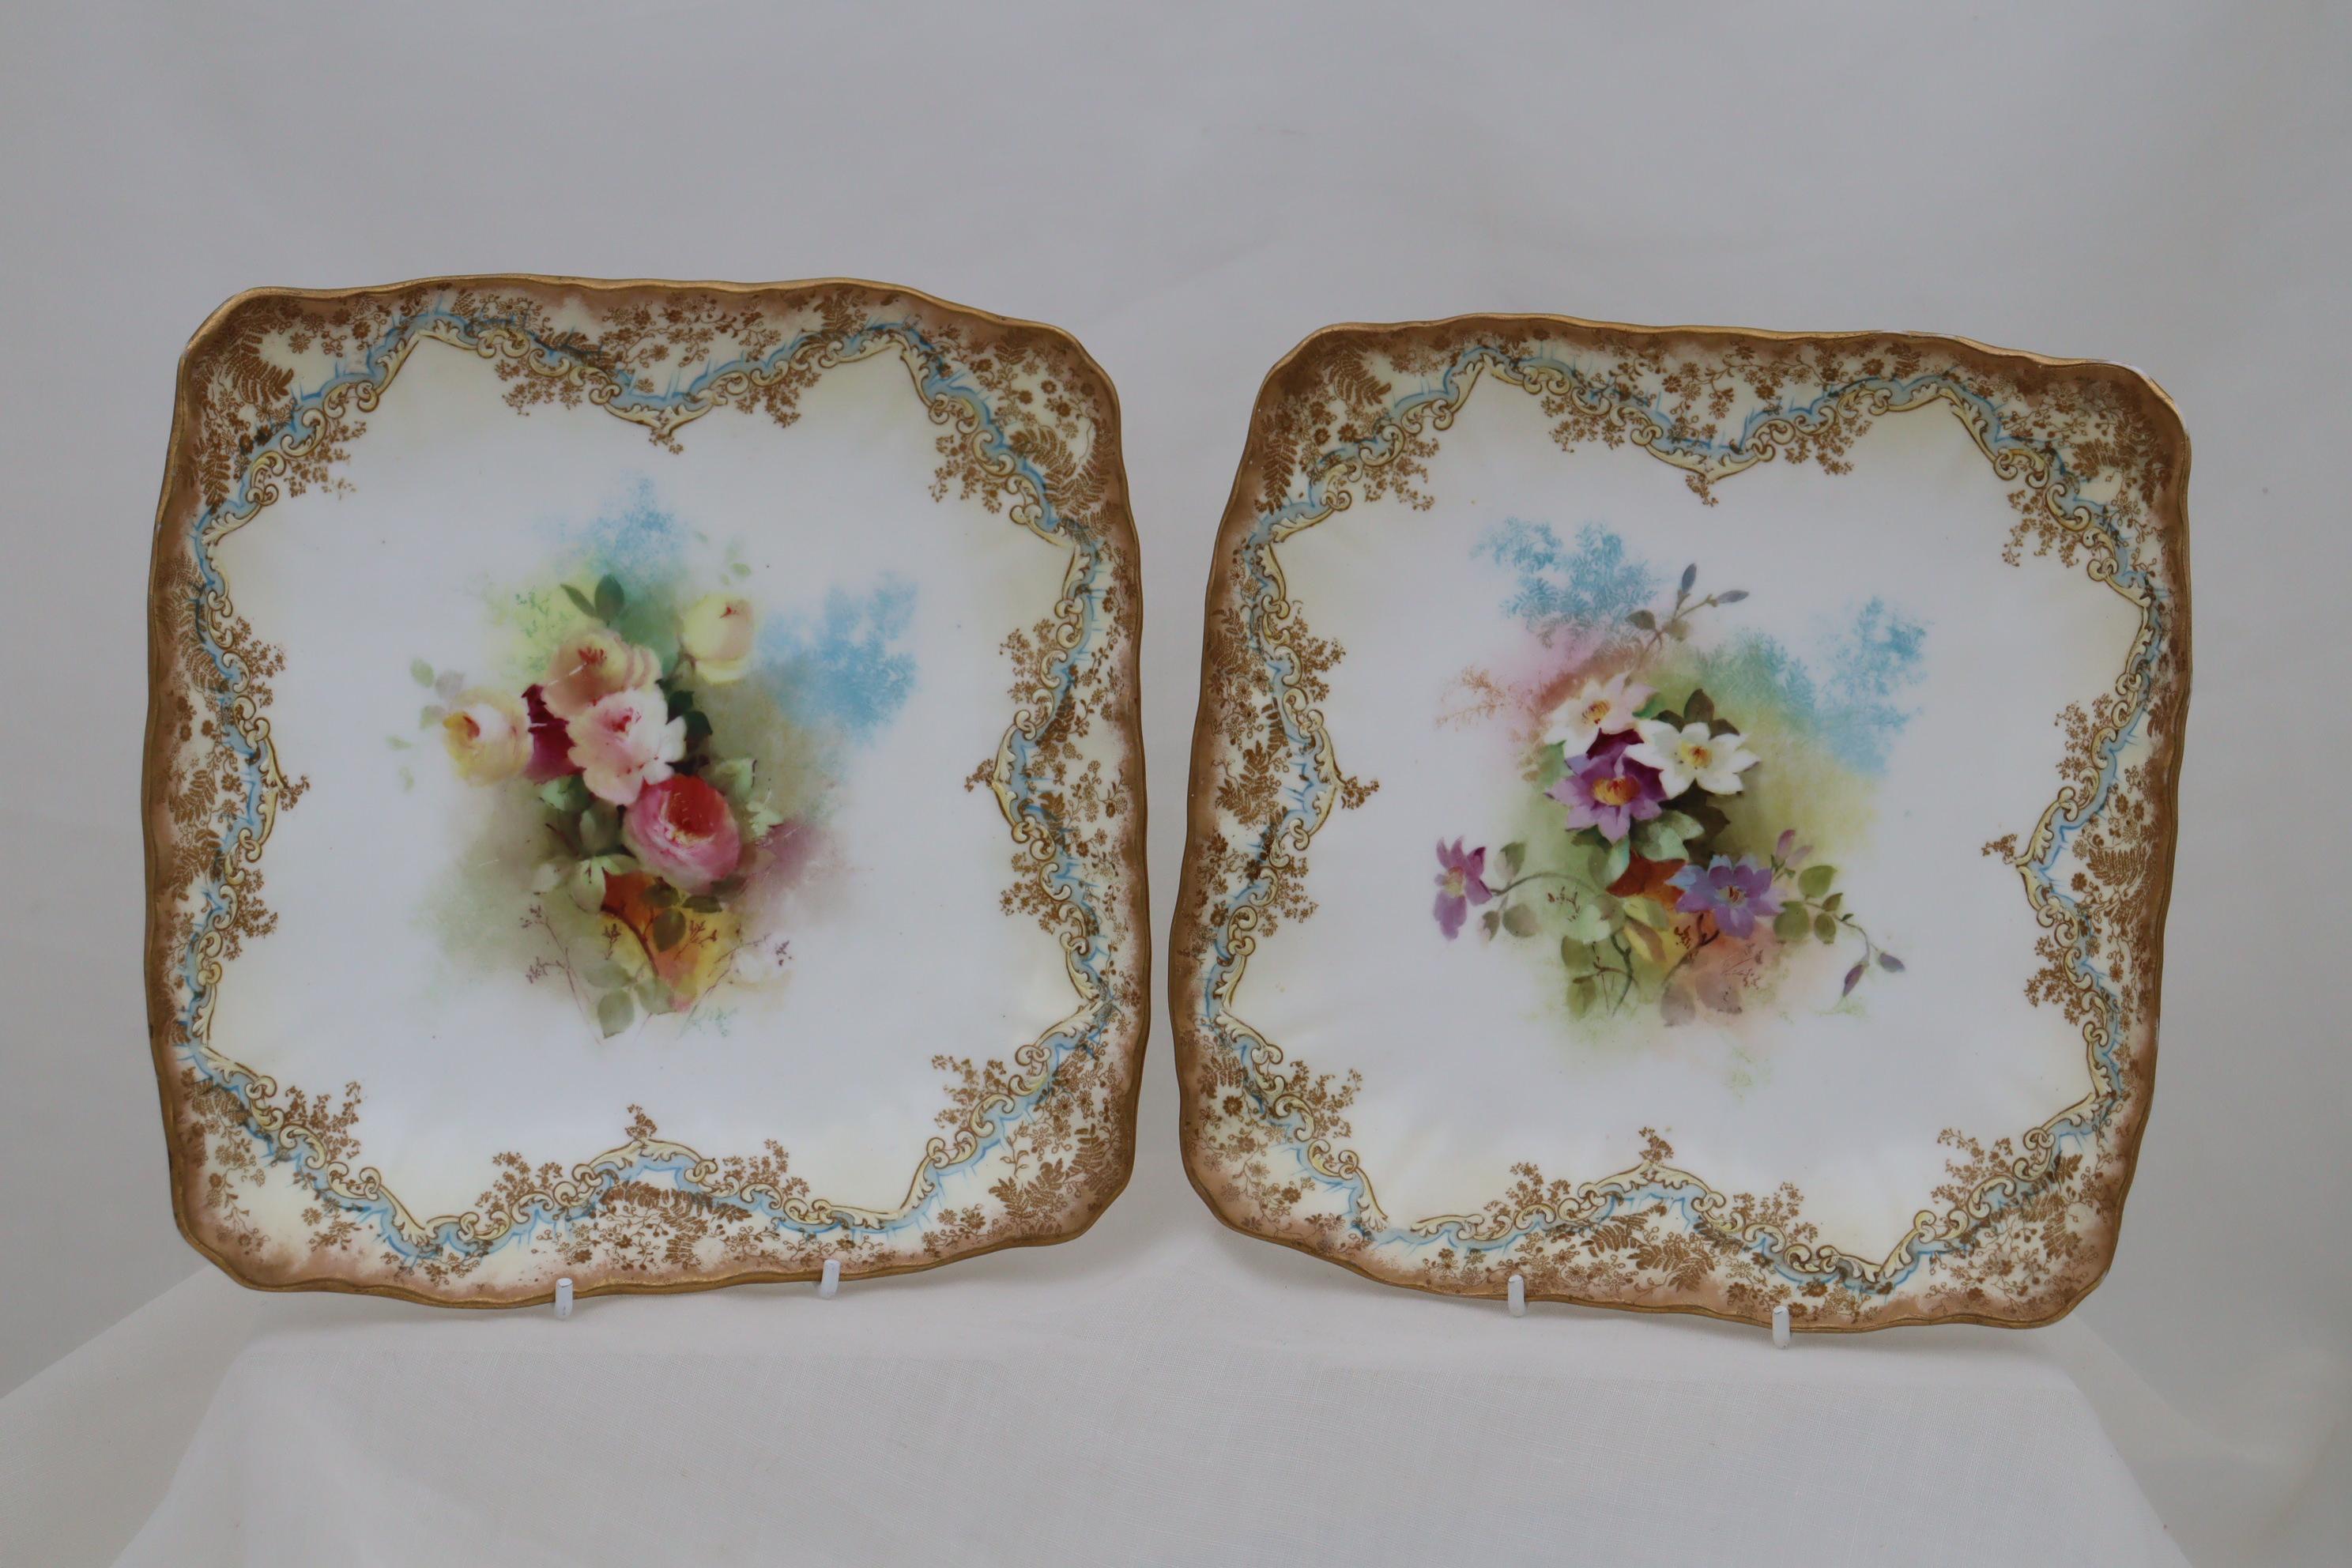 These square, shallow Doulton Burslem porcelain bowls feature sprays of delicately hand painted flowers to the centre, while the border is composed of raised paste arabesques in cream, a painted border of pale blue and an intricate gilt border with